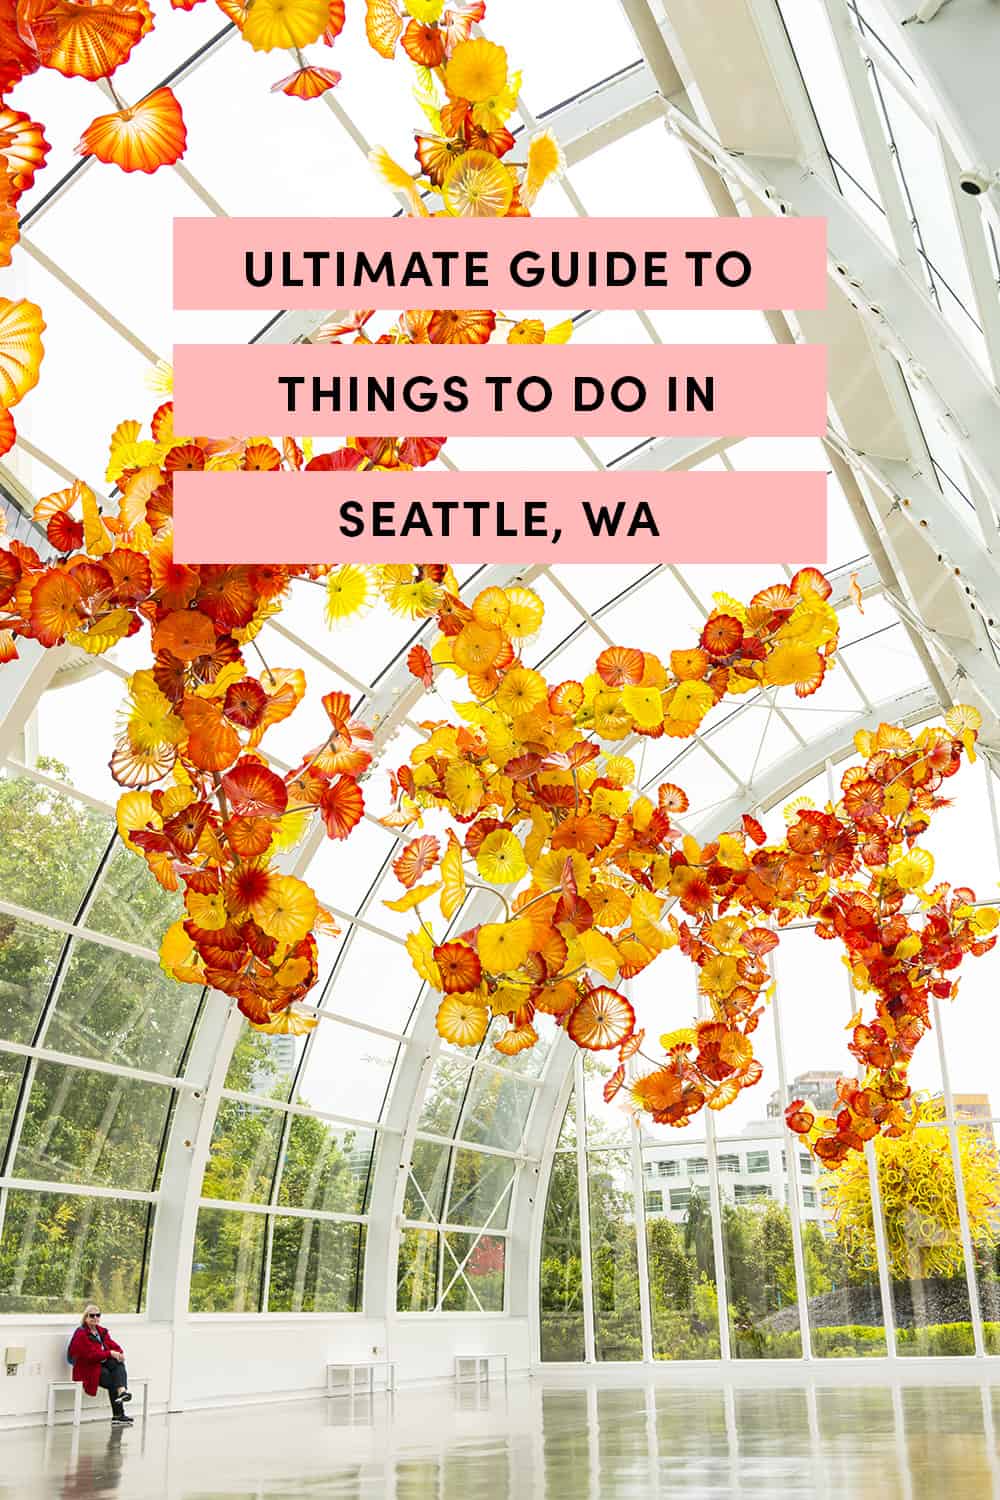 Ultimate Guide To Things To Do In Seattle, WA